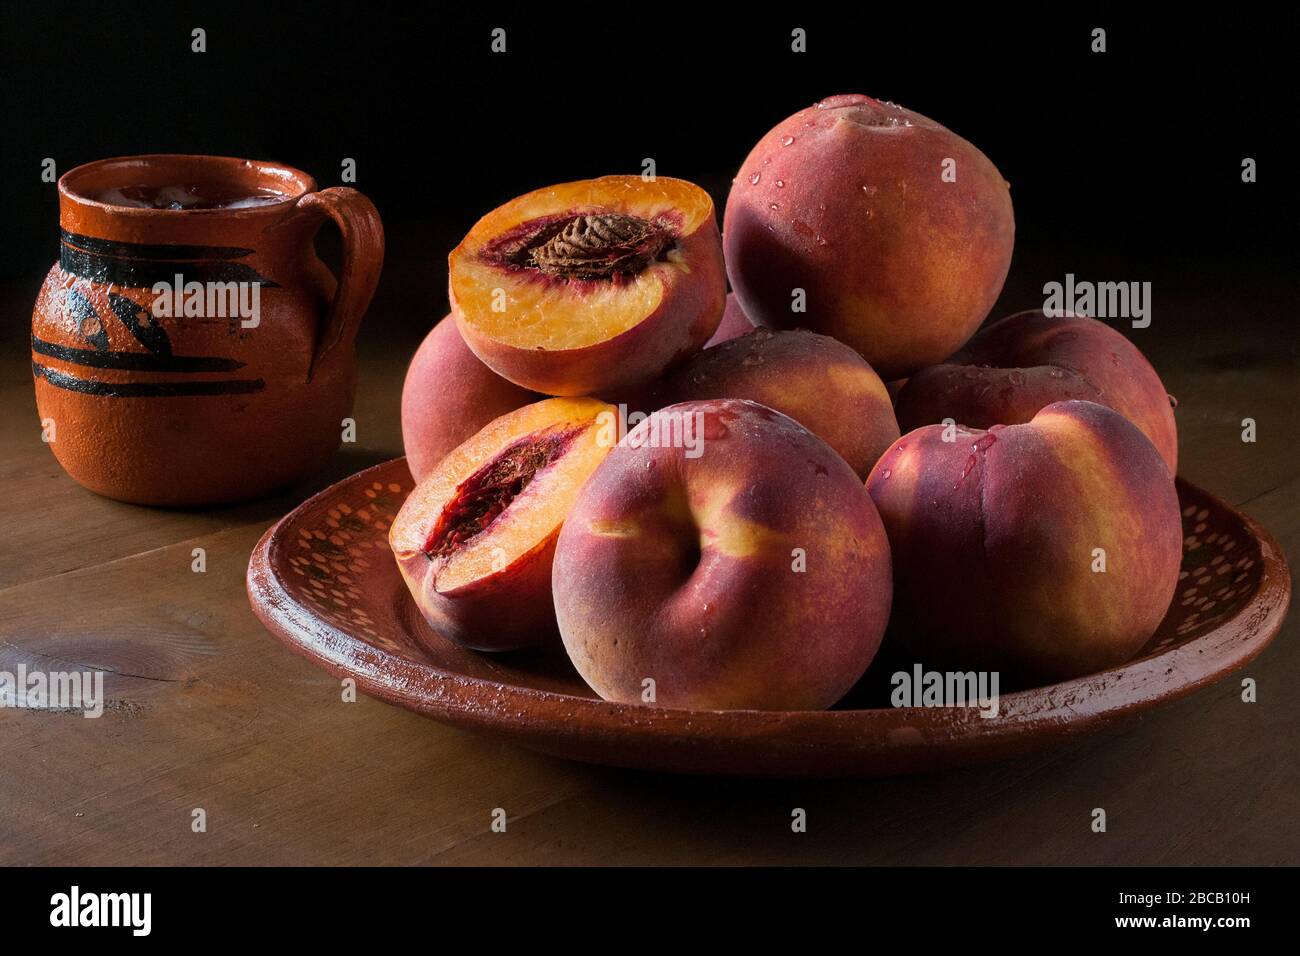 Peaches on a clay or mud Mexican plate with a Mexican mud jar with water in it, in dark food photography or low key light, macro photography. Stock Photo